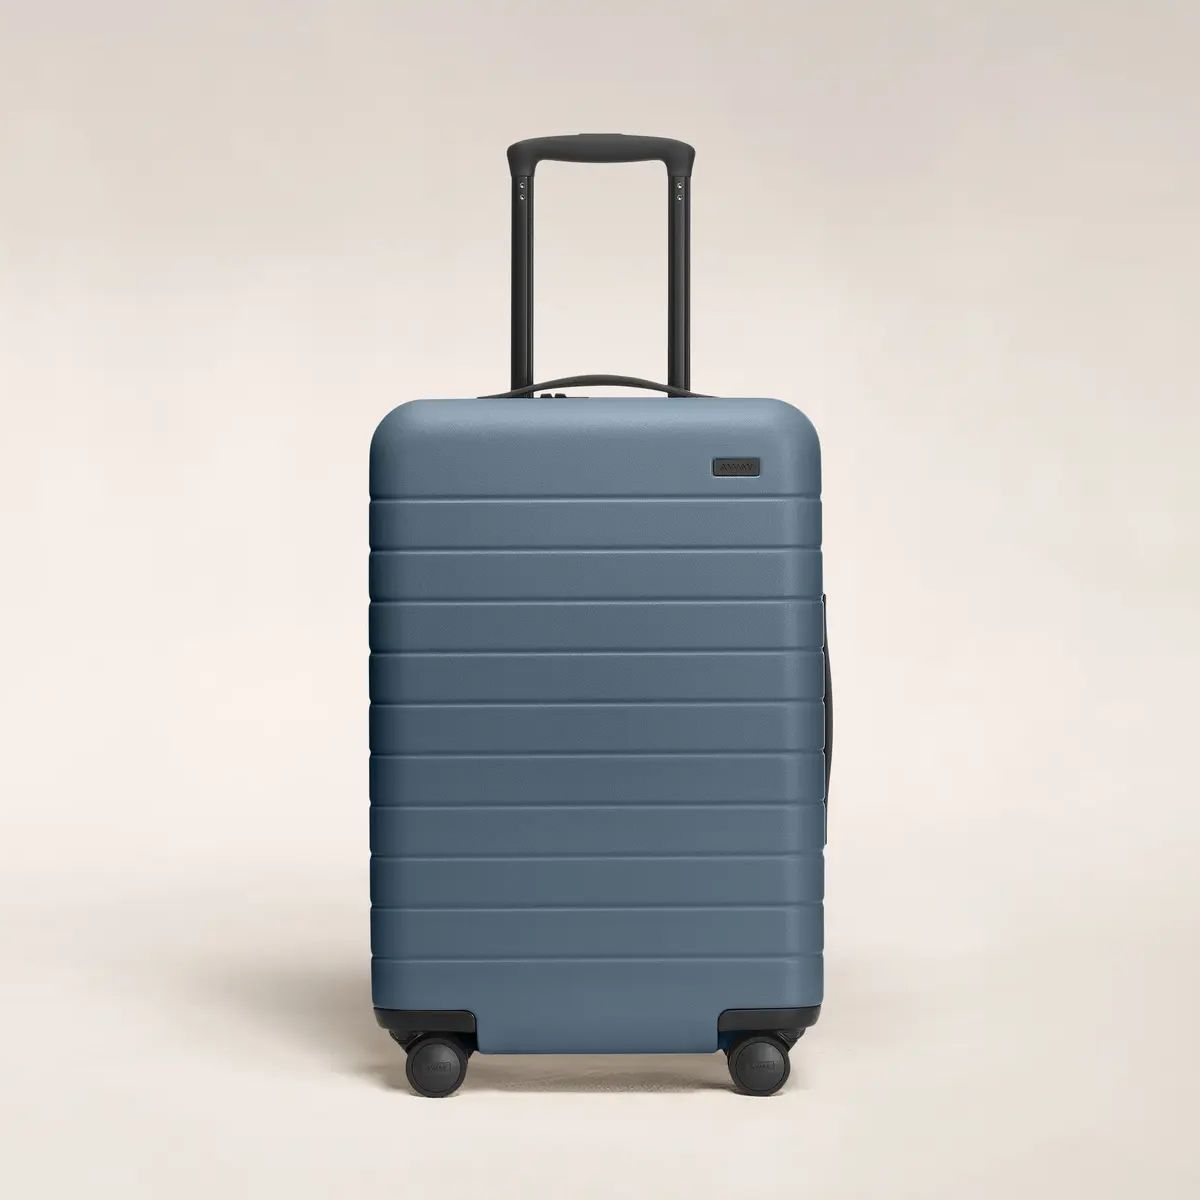 The Best CarryOn Luggage of 2022